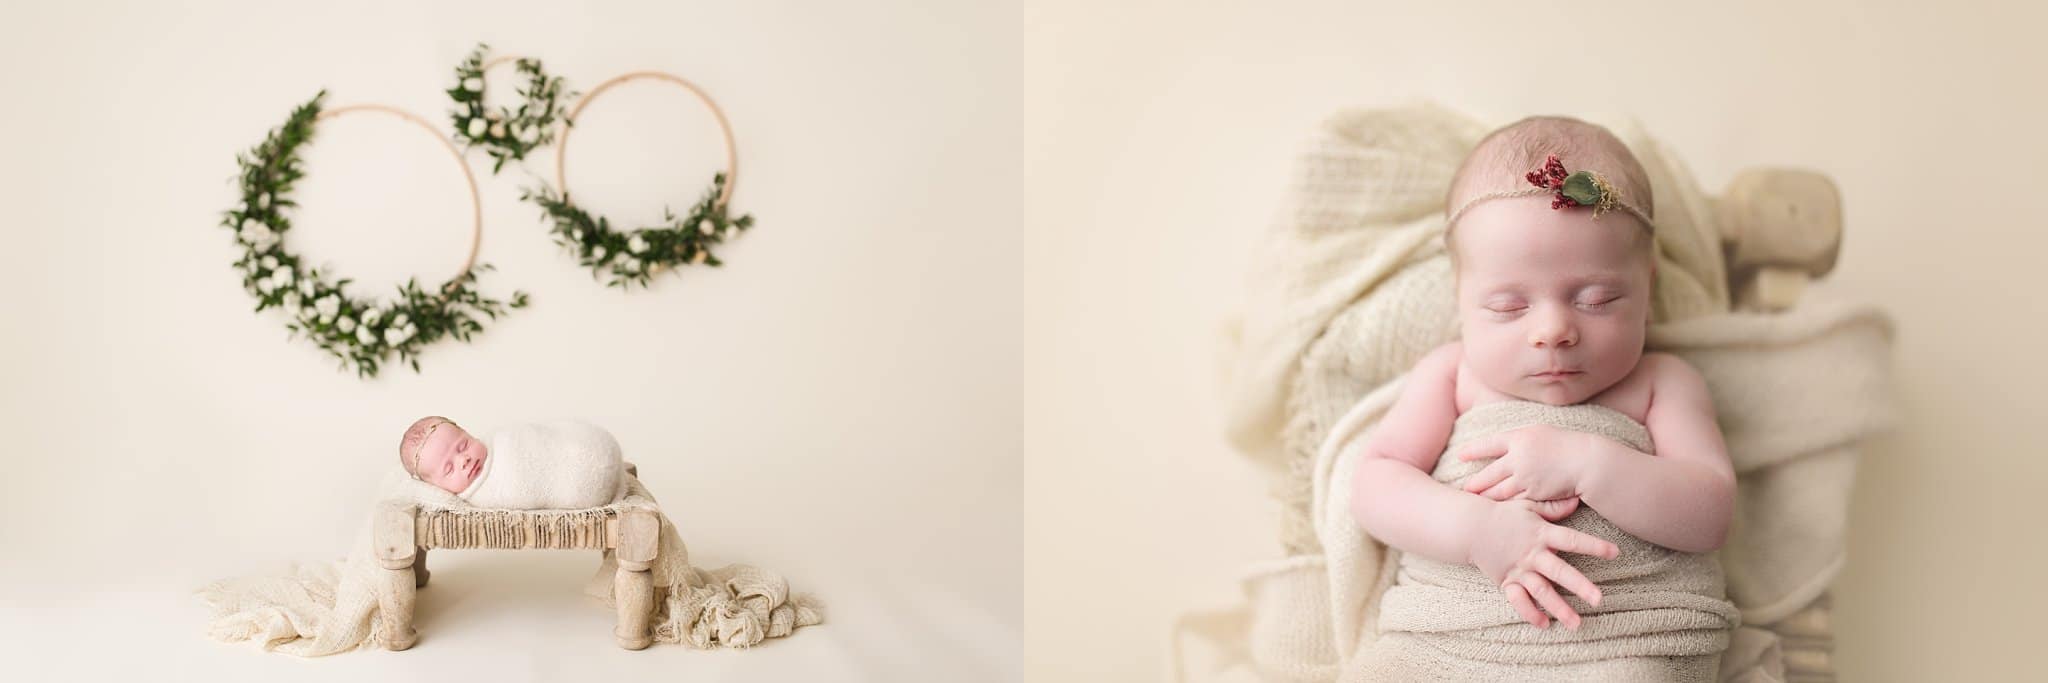 new baby photos newborn baby girl swaddled in cream on cream background with greenery wreaths newborn photo session by 8.08 Photography in ponte vedra fl